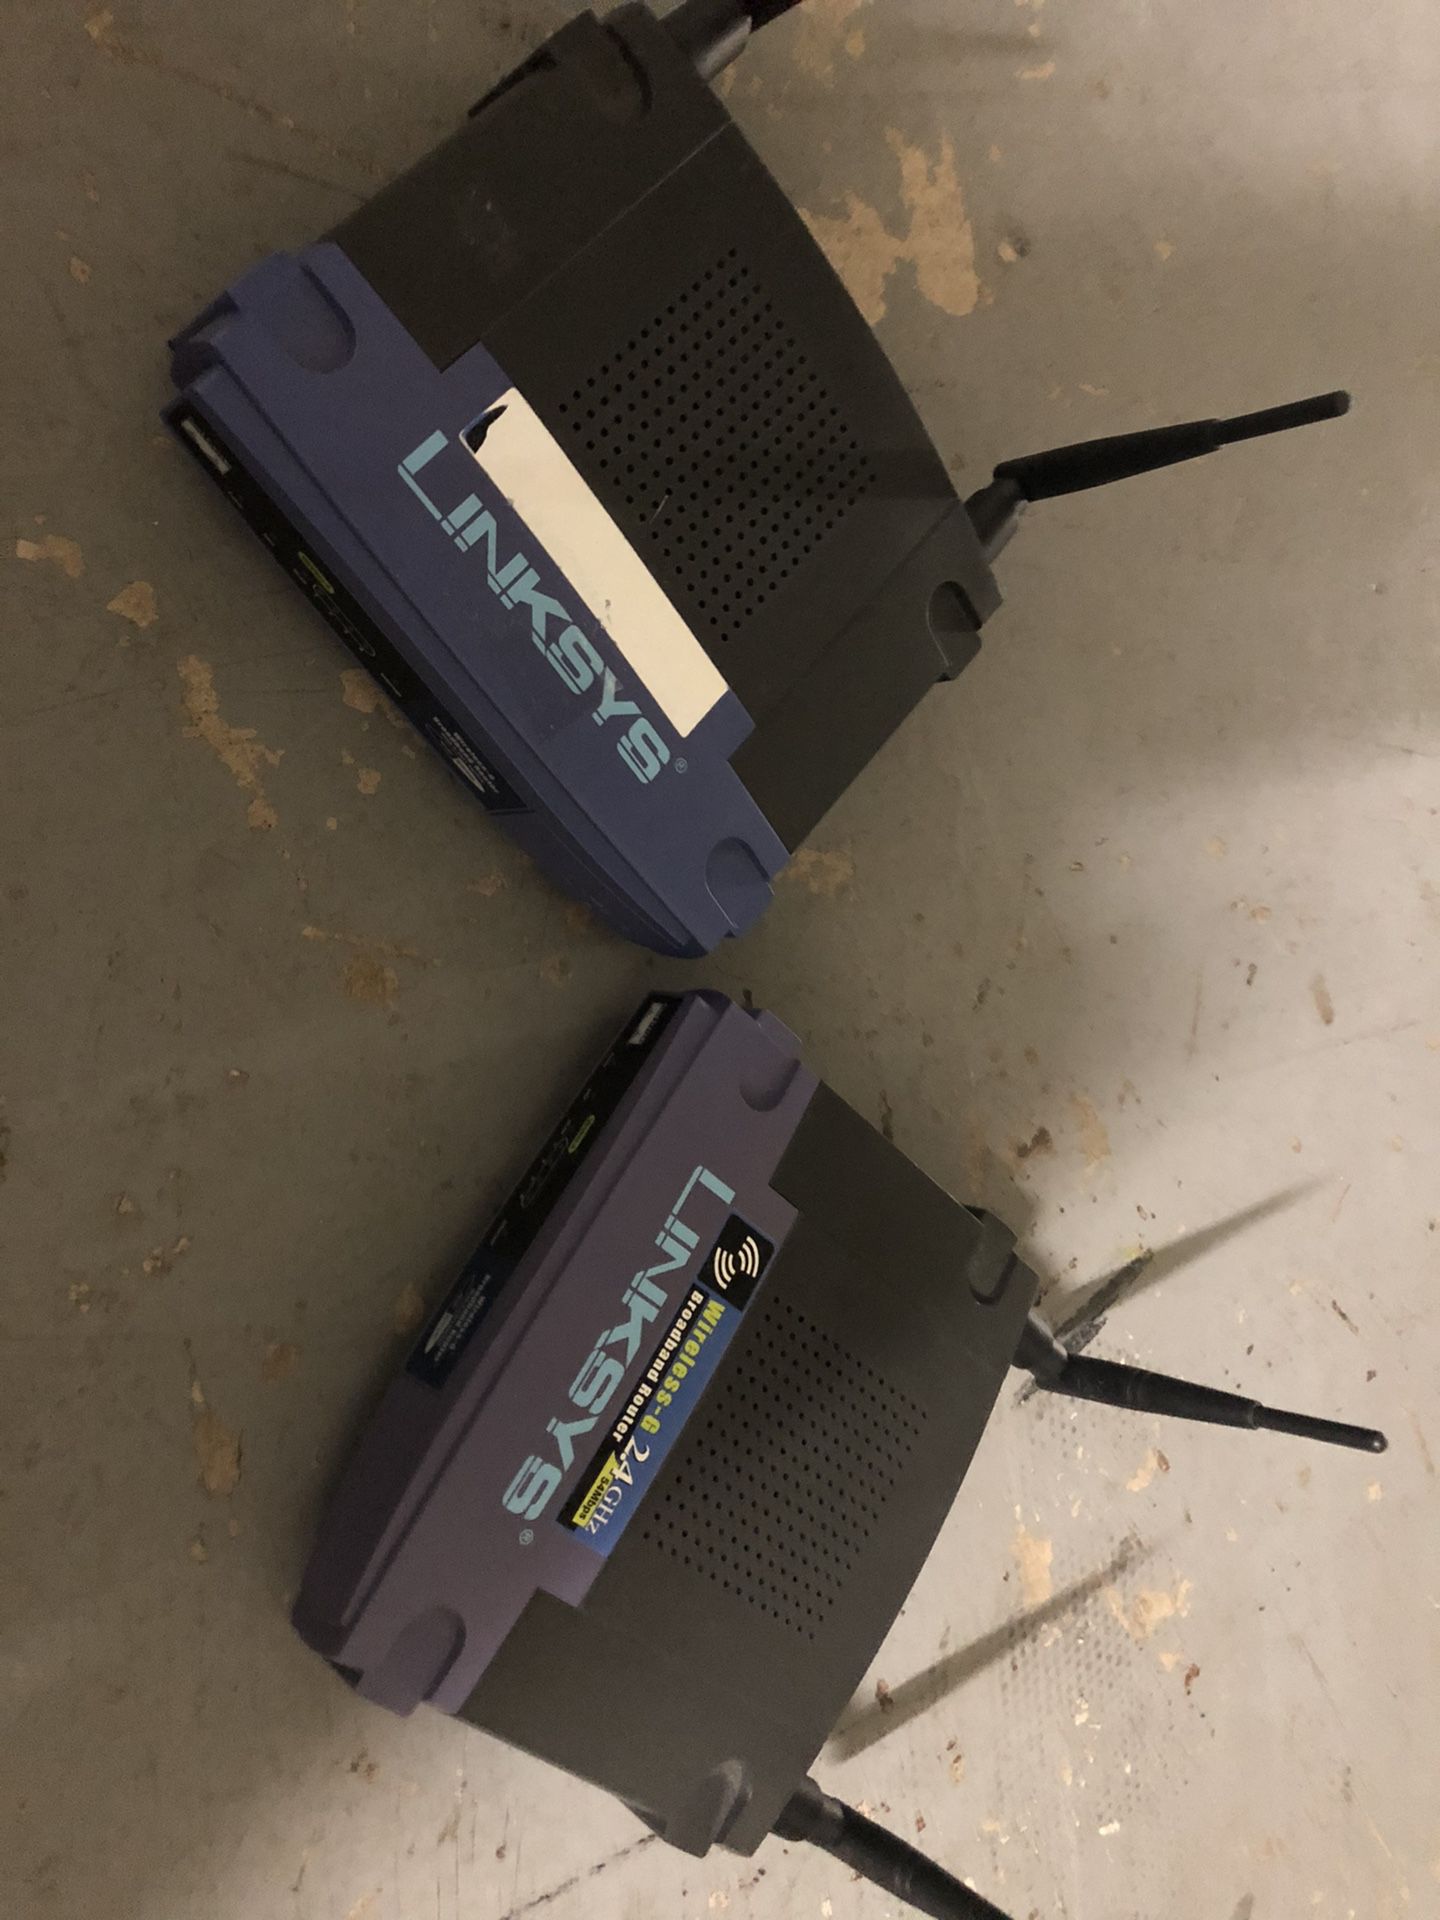 2 LinkSys Routers